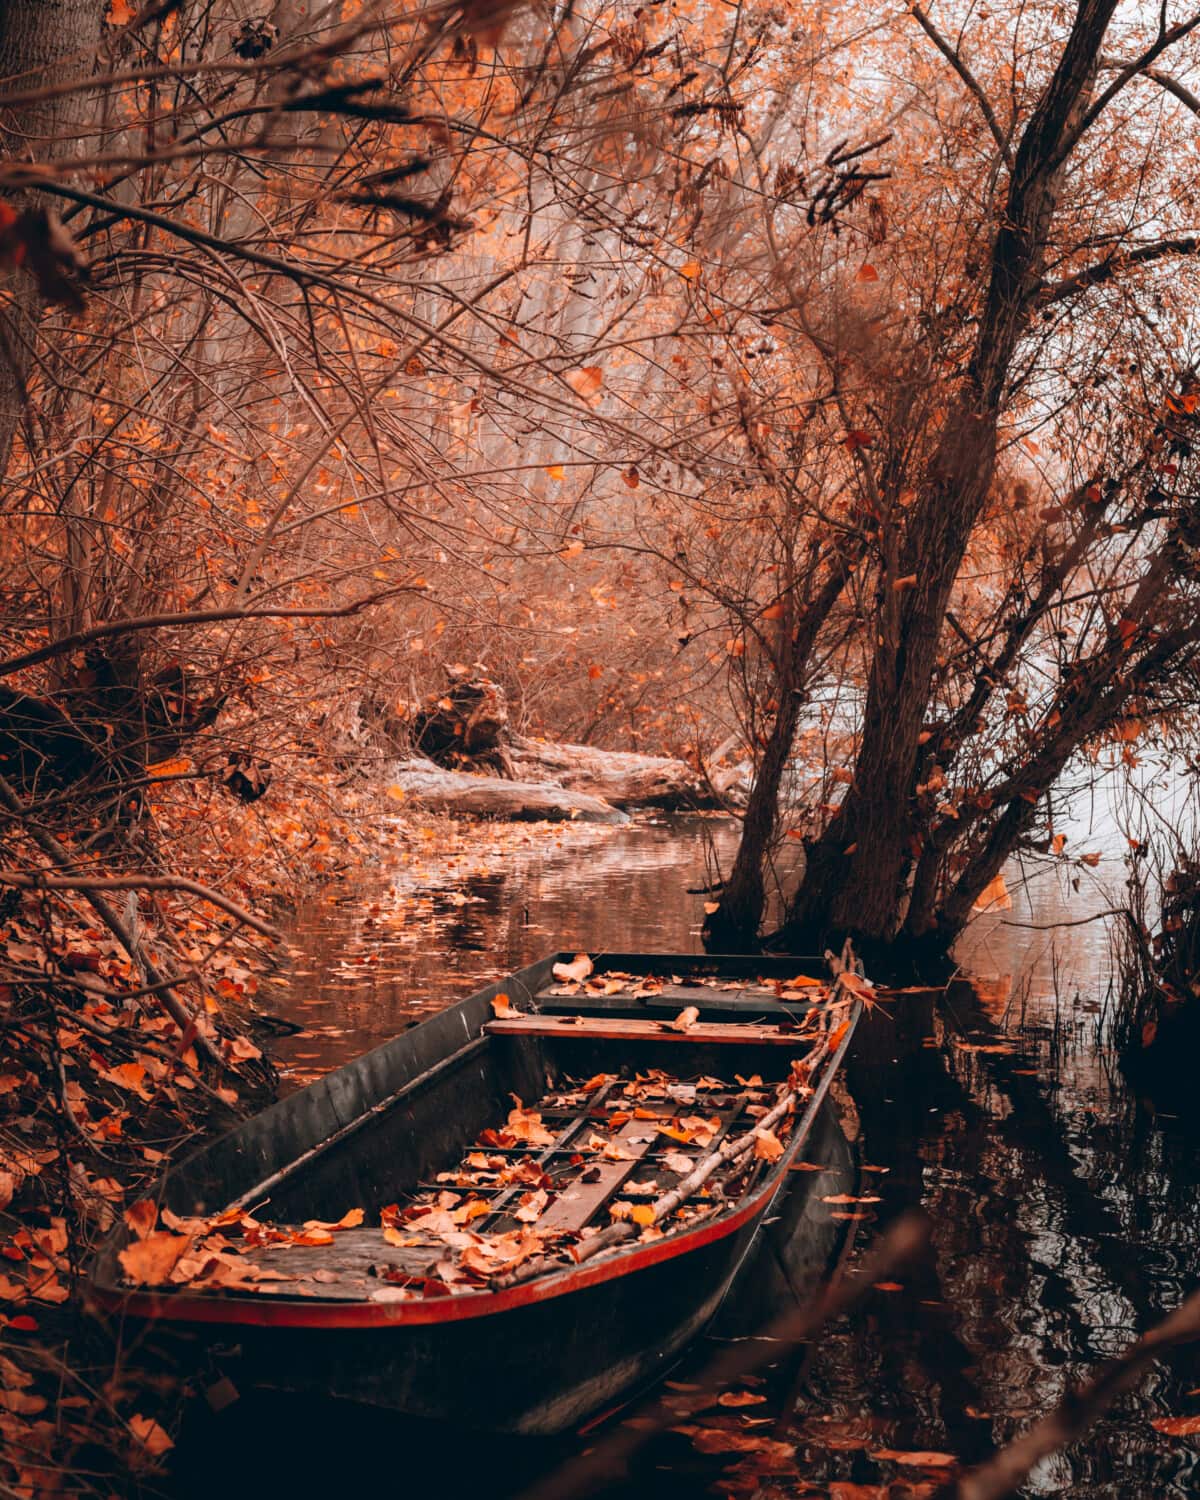 autumn, boat, abandoned, riverbank, tree, trees, forest, river, water, nature